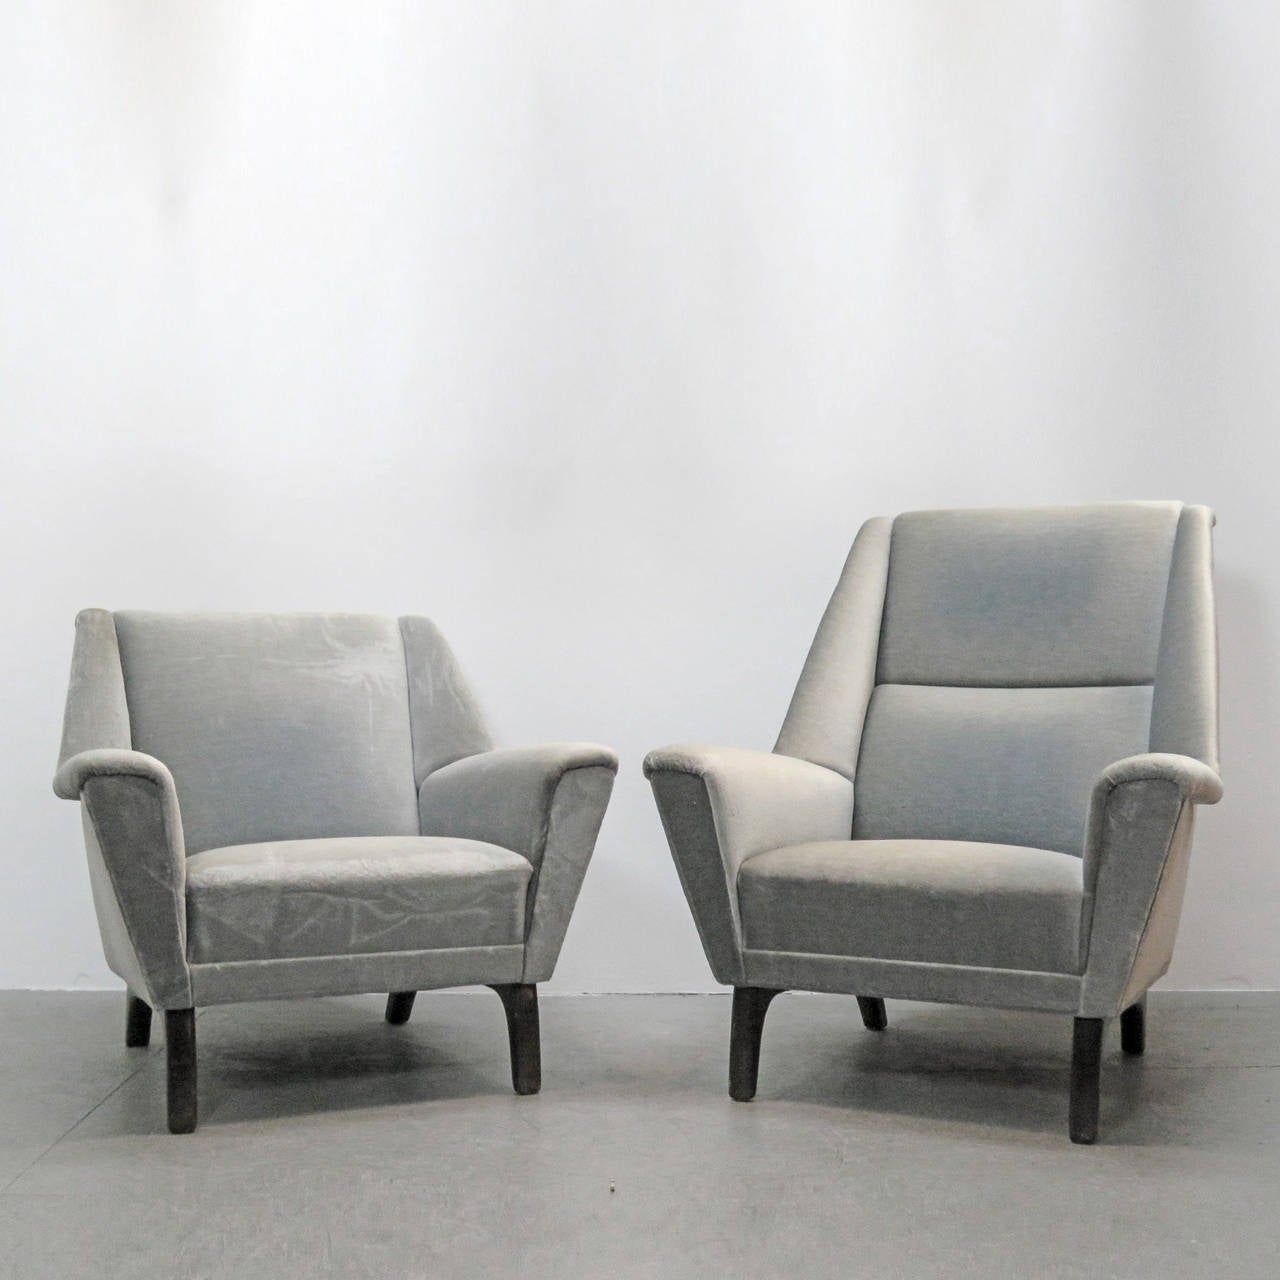 Stunning pair of Danish high back or low back lounge chairs with gray mohair upholstery and teak legs (dimensions shown for the high back chair).